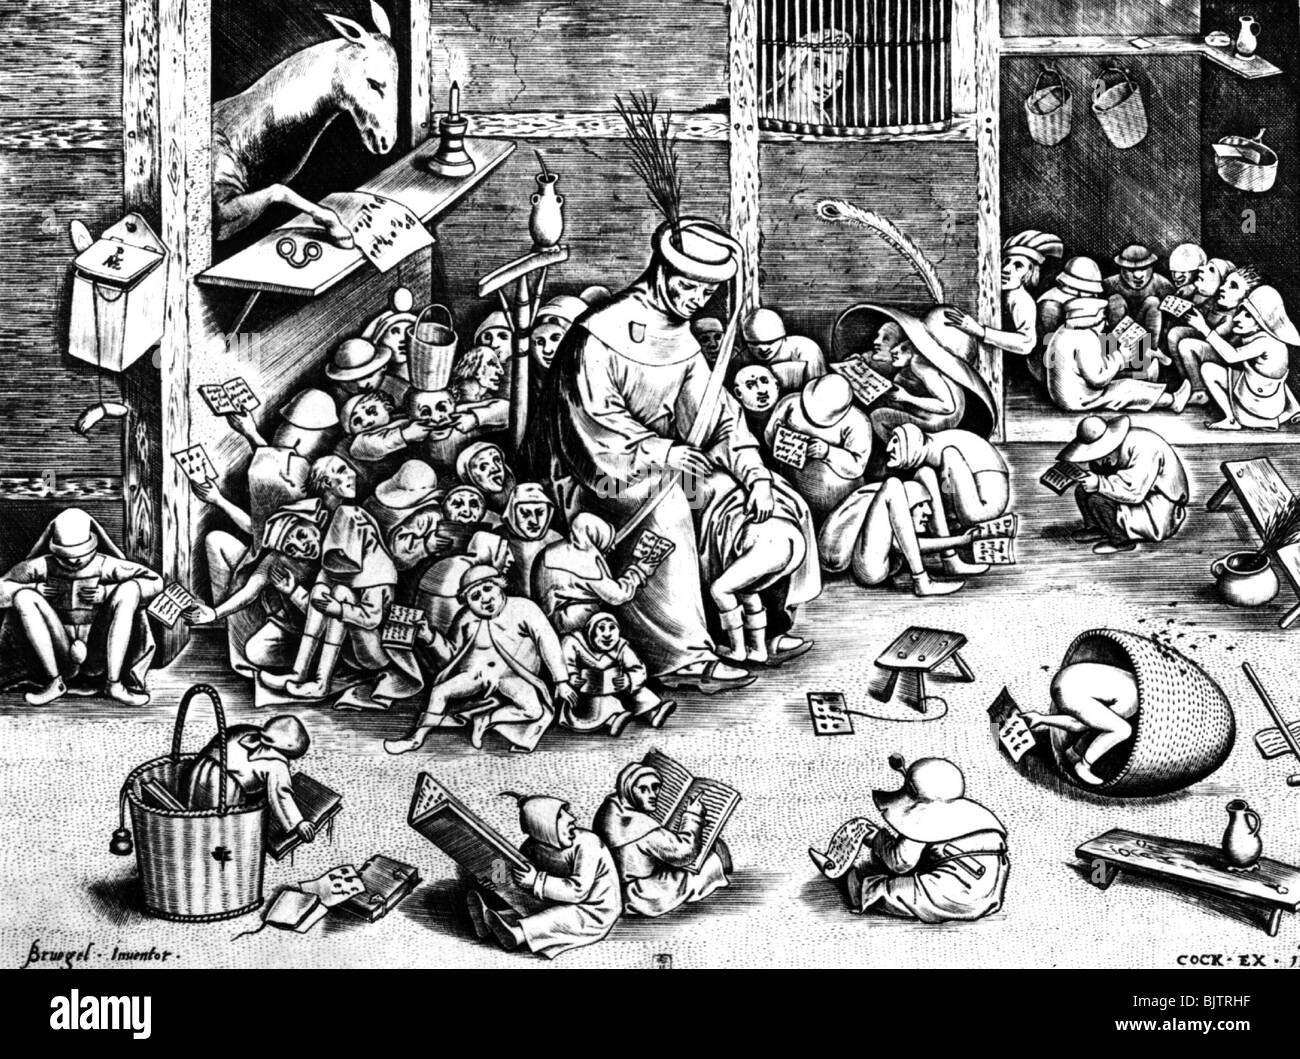 education, corporal punishment, scene in a school, 16th century, caricature, historic, historical, birch, birching, teacher, beating, hitting, pupil, student, pupils, students, people, Stock Photo